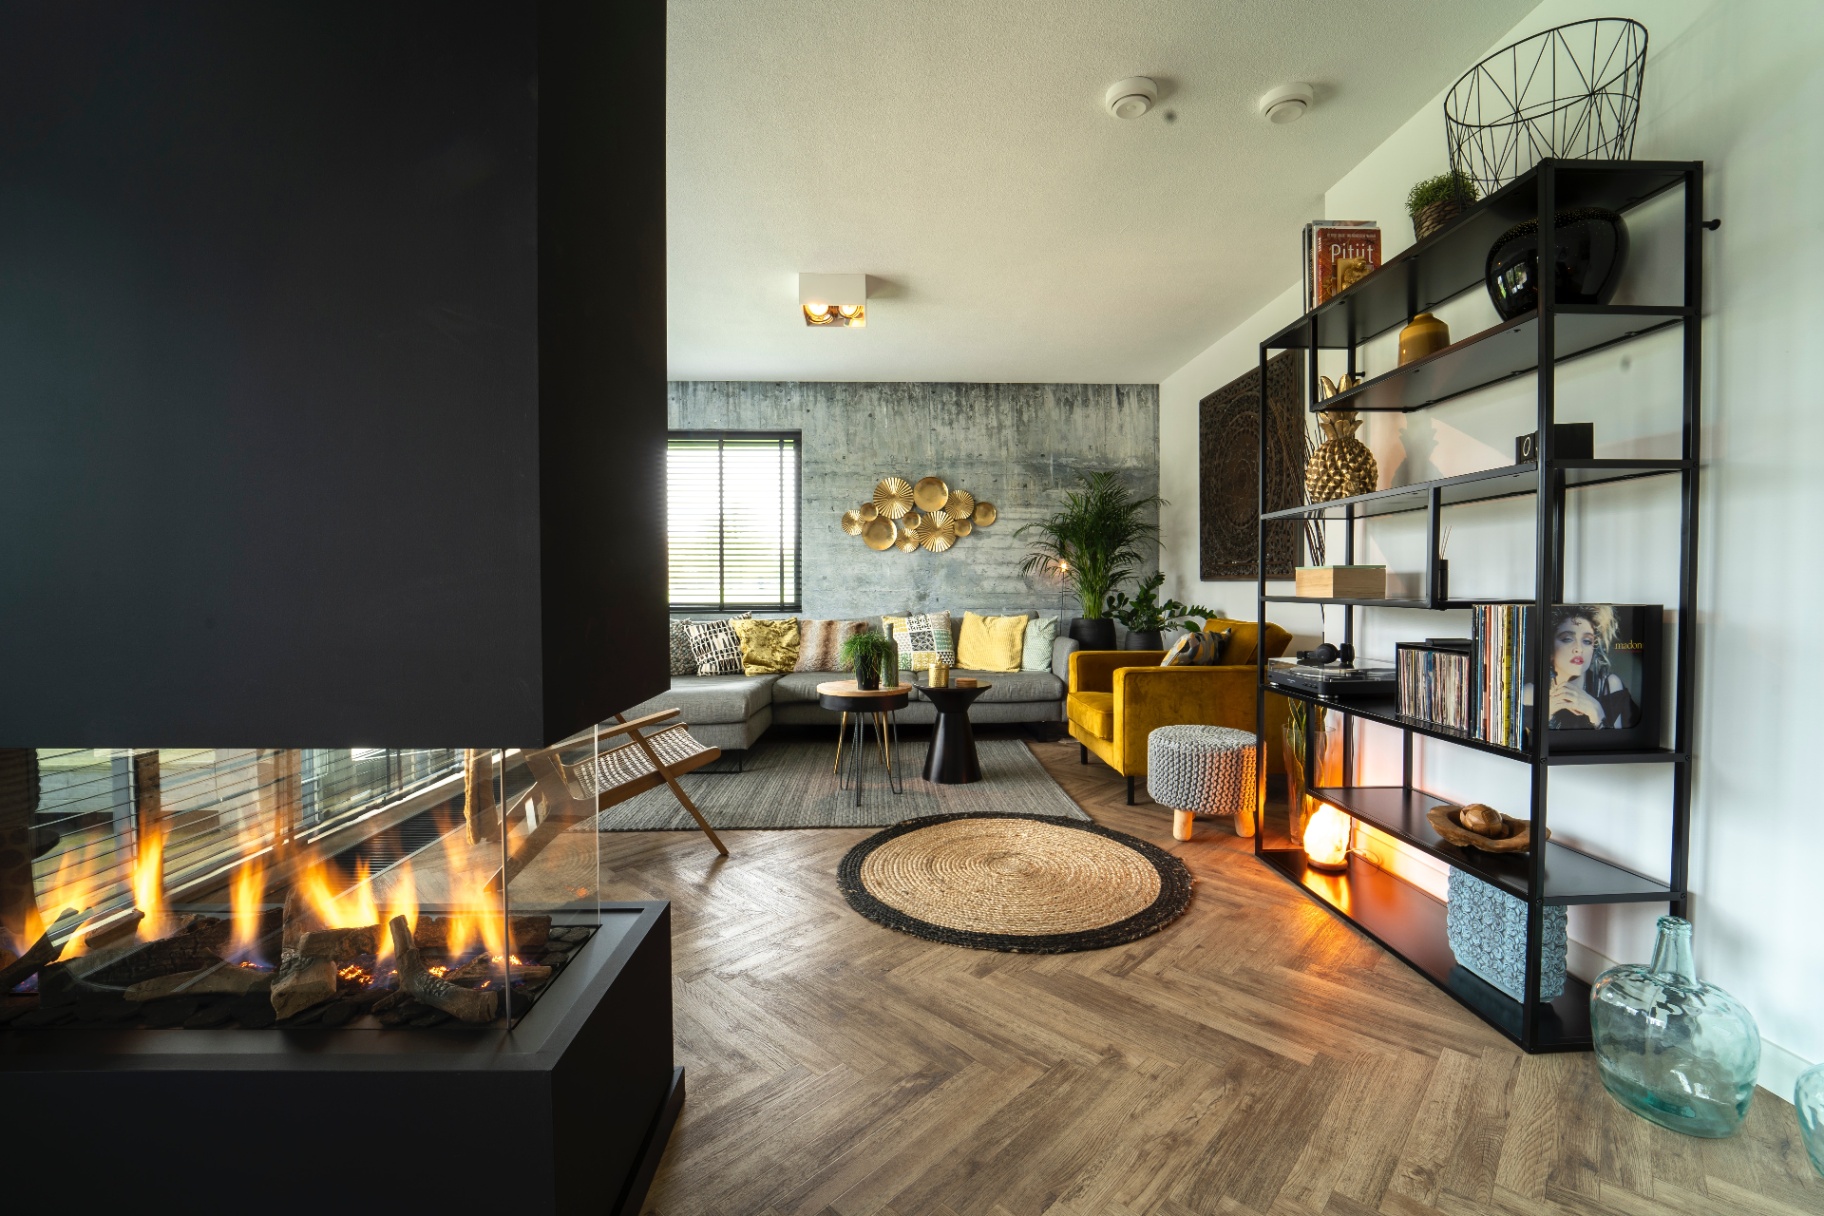 Gas fireplace heater alight in a cosy room